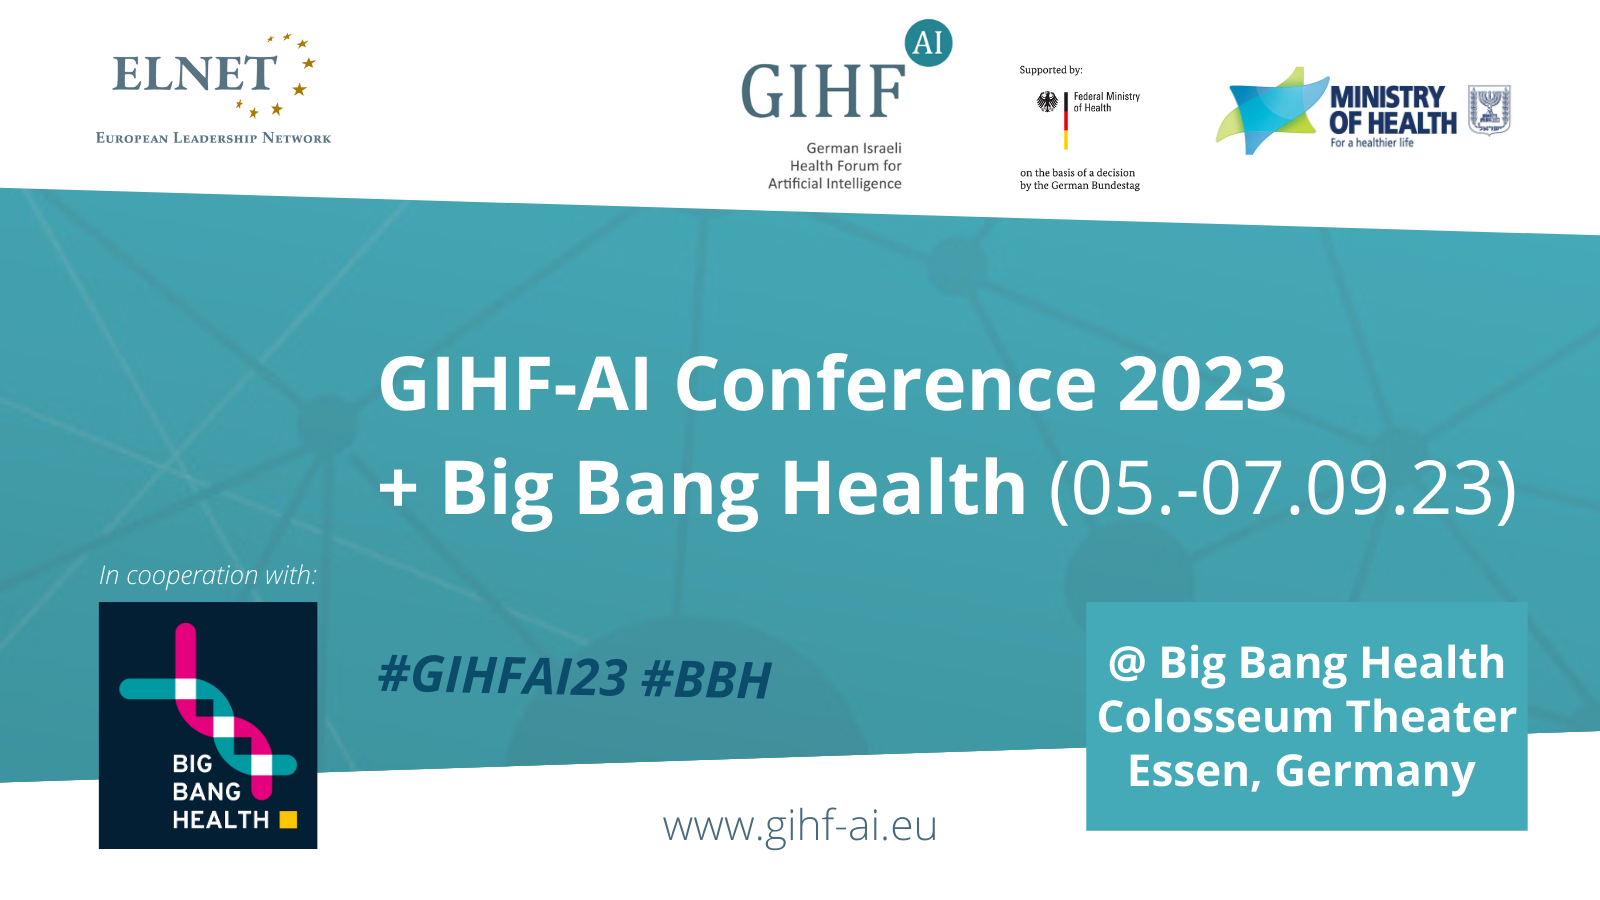 GIHF-AI Conference 2023